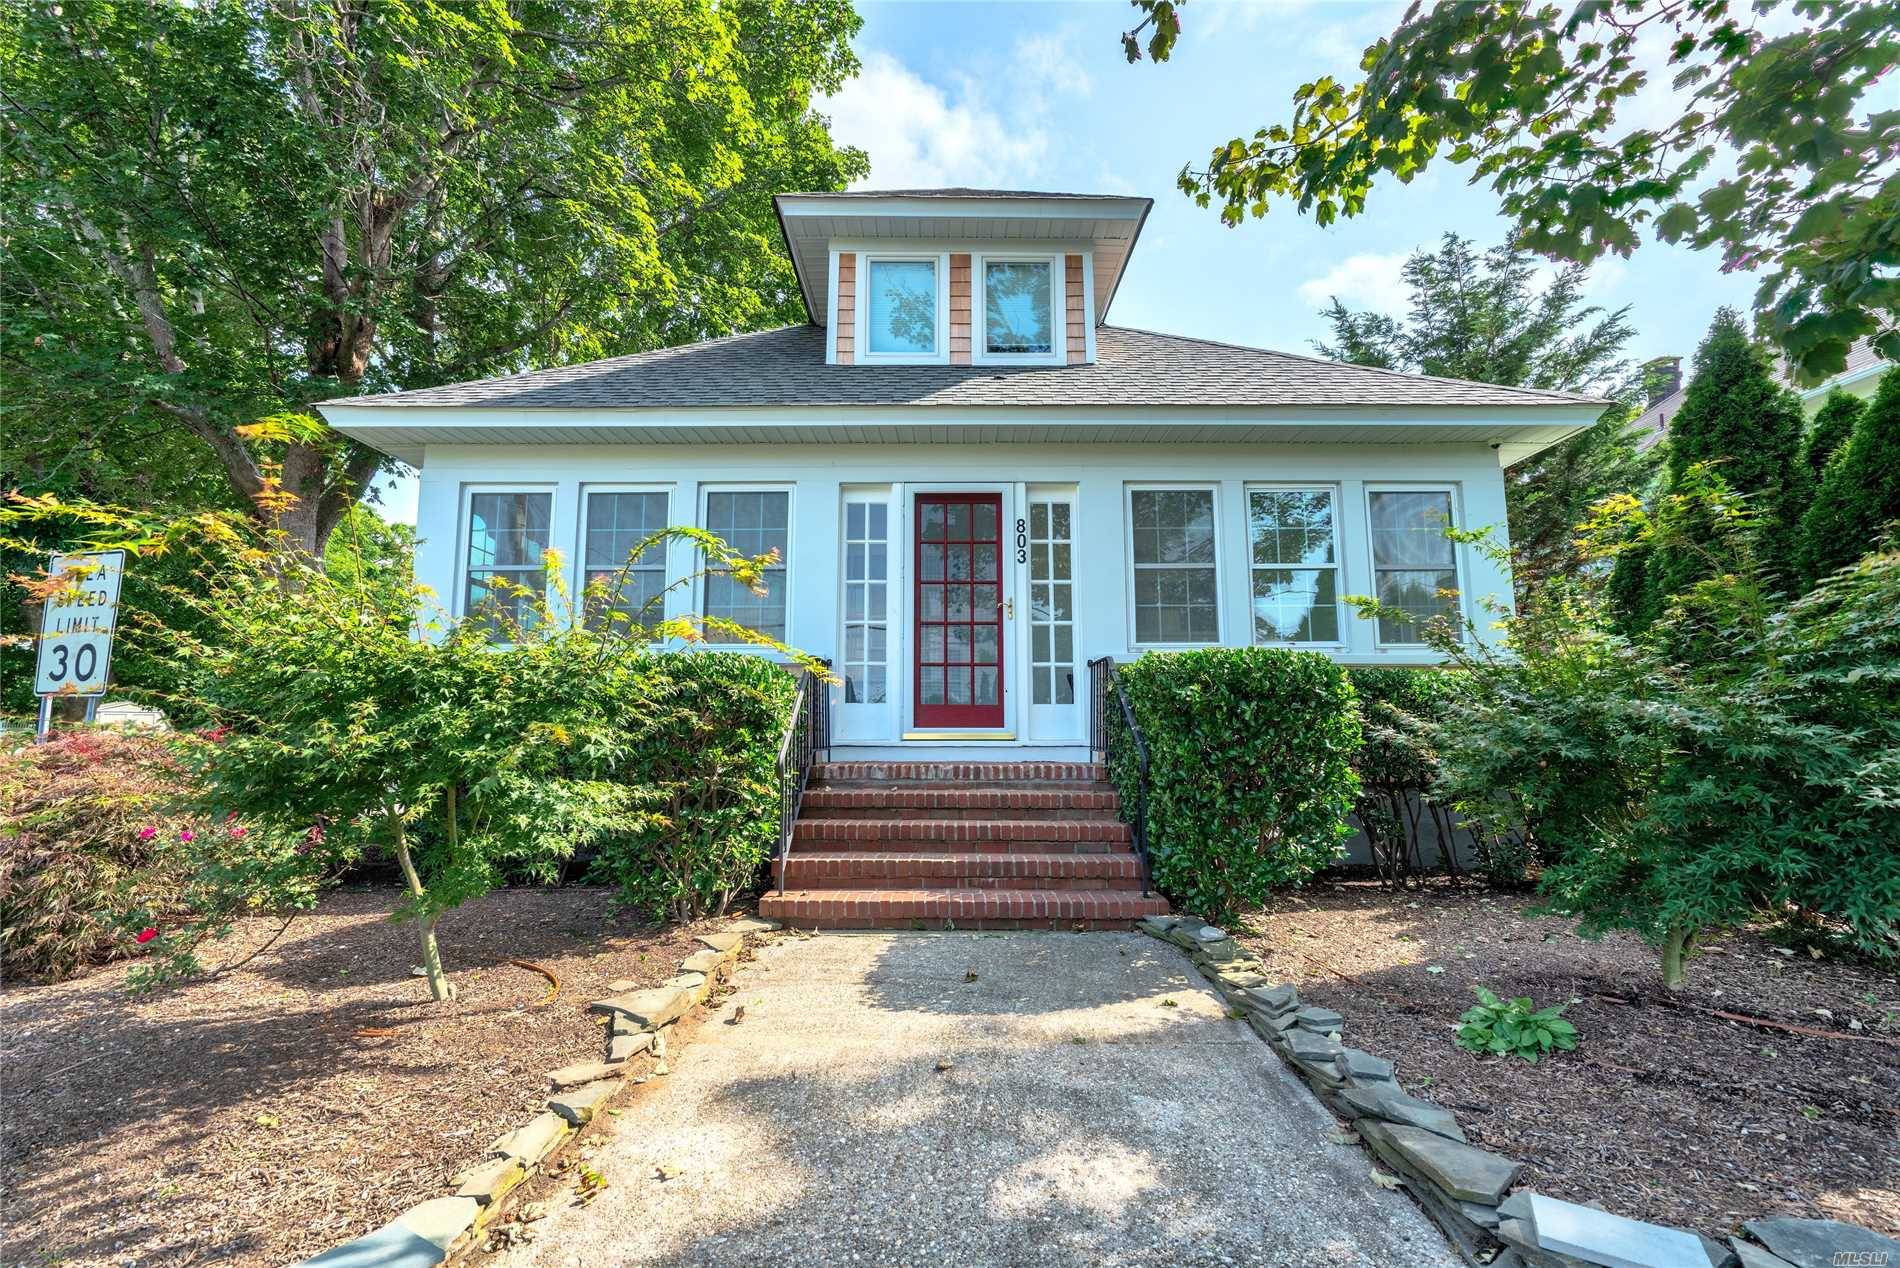 Newly Renovated And Beautifully Decorated Craftsman Cottage Located Near The Heart Of Greenport.